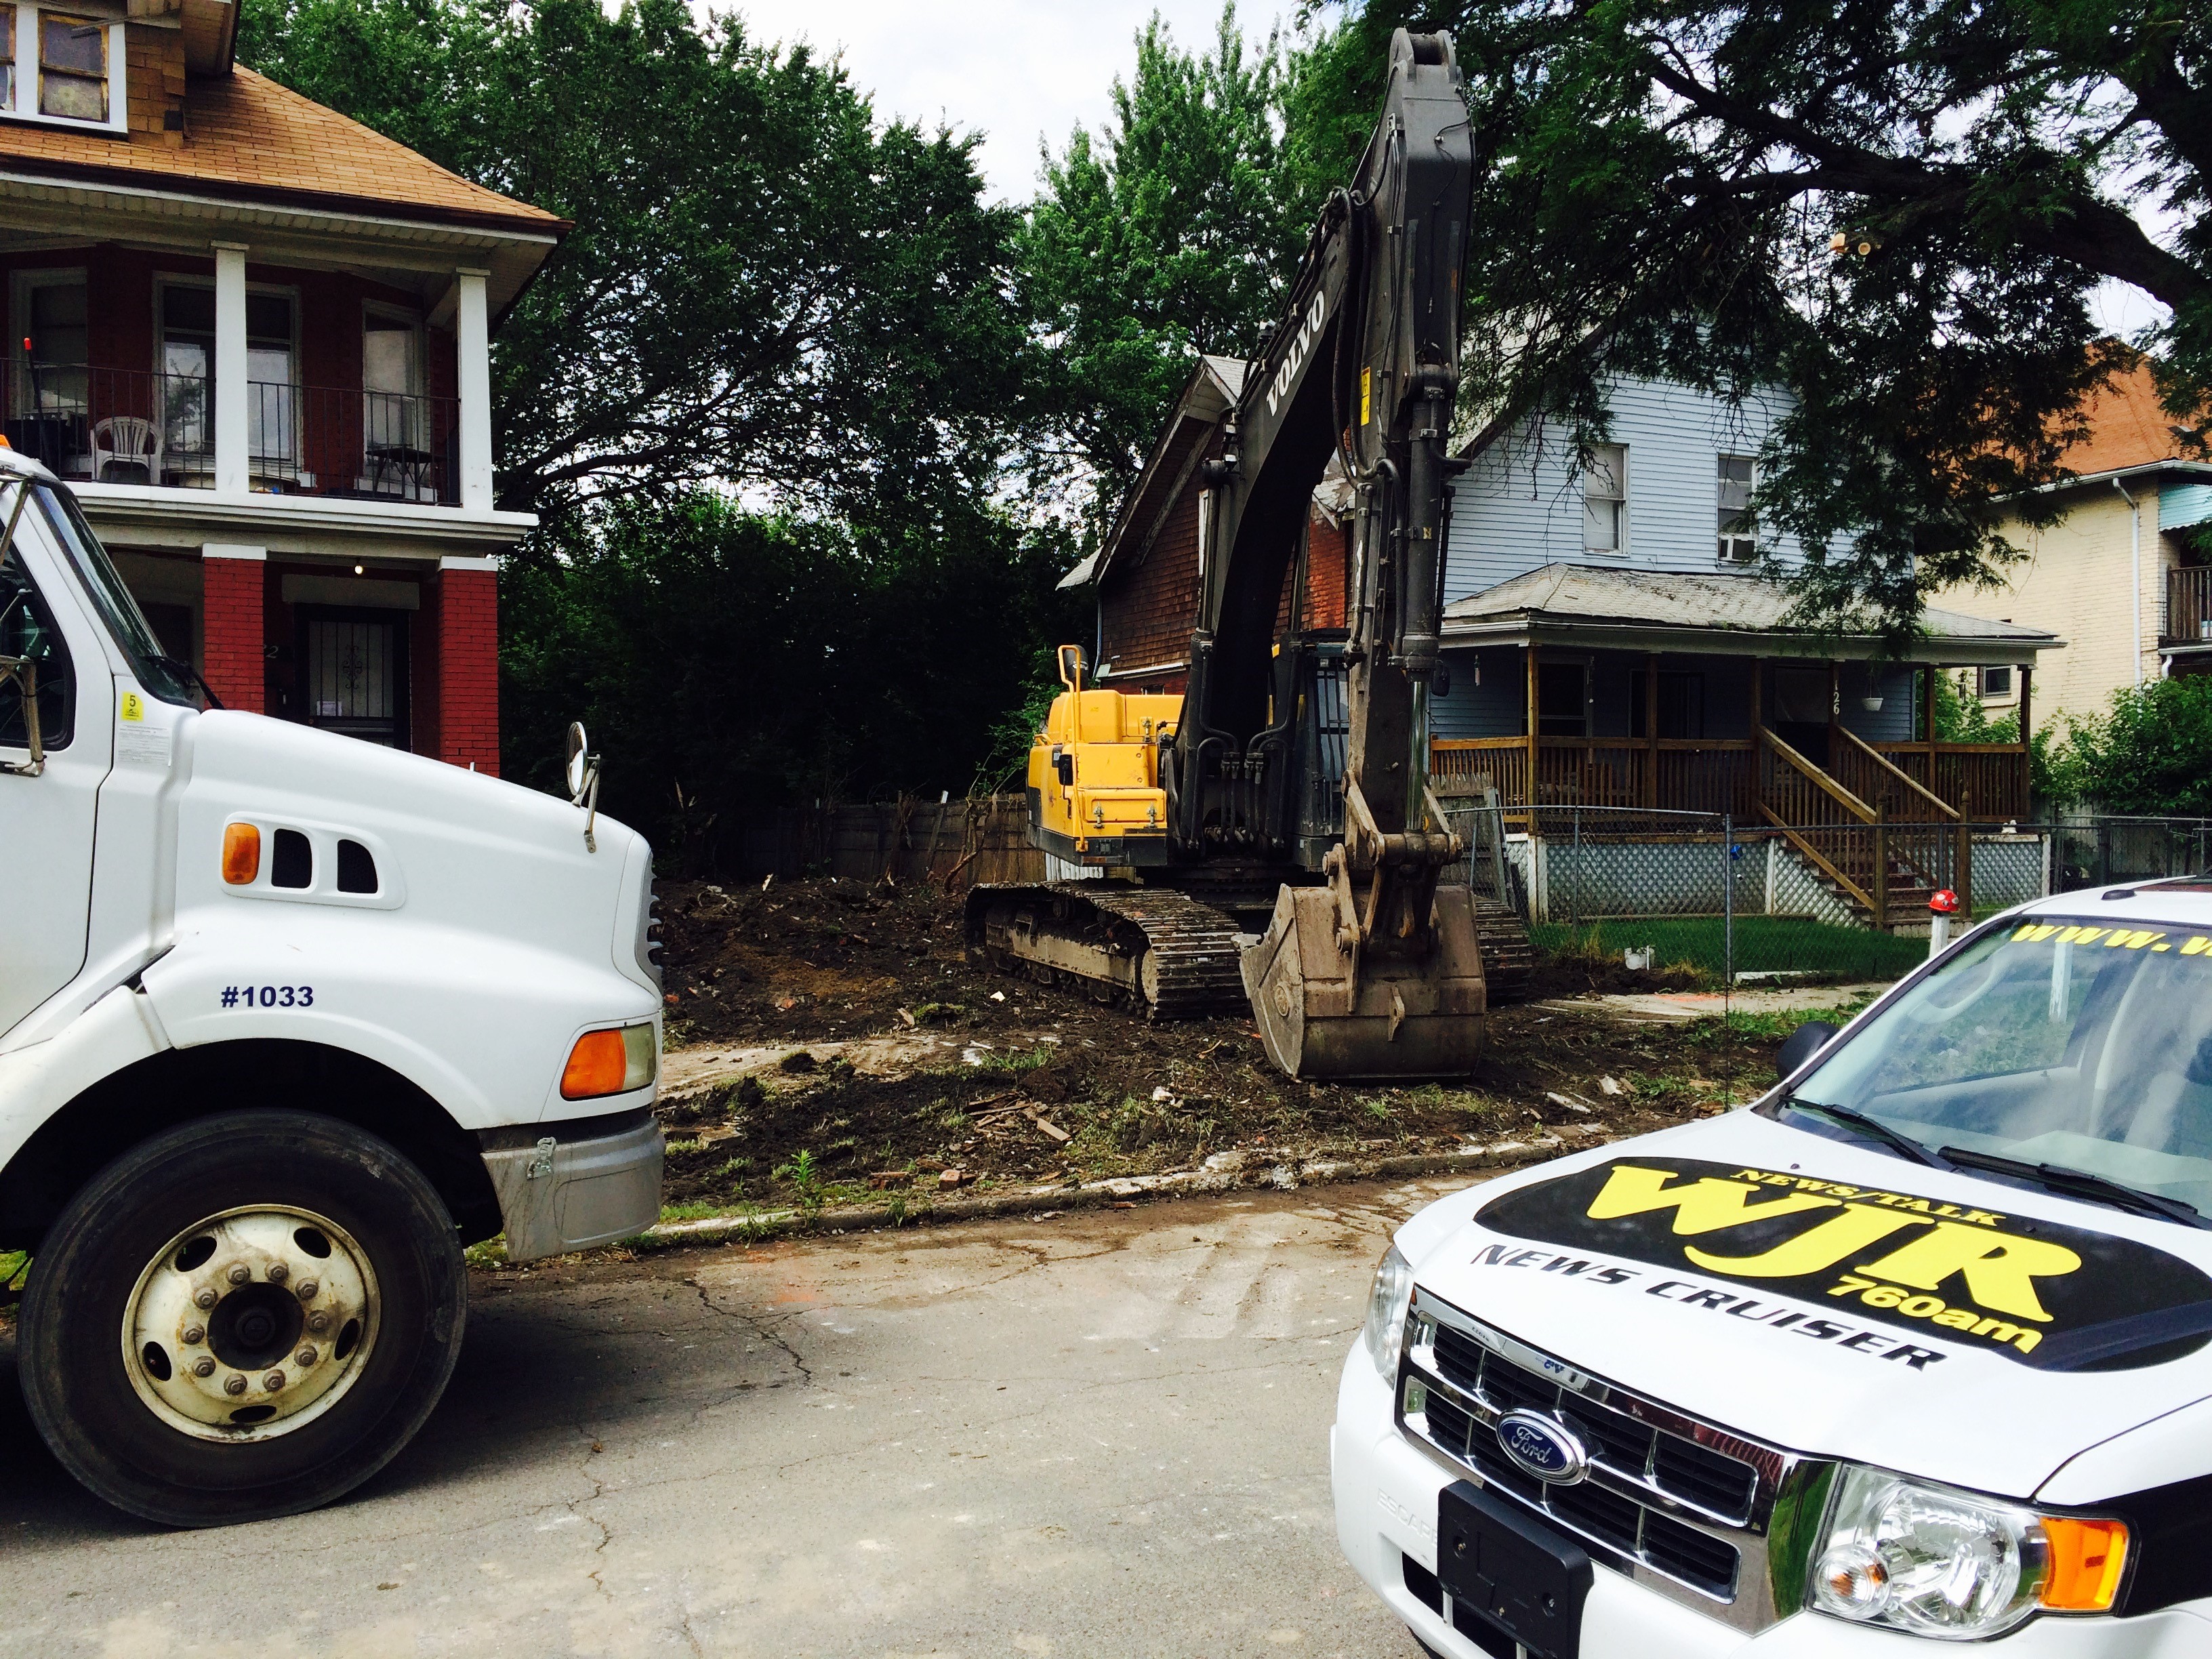 “Leaning” house in Highland Park finally comes down